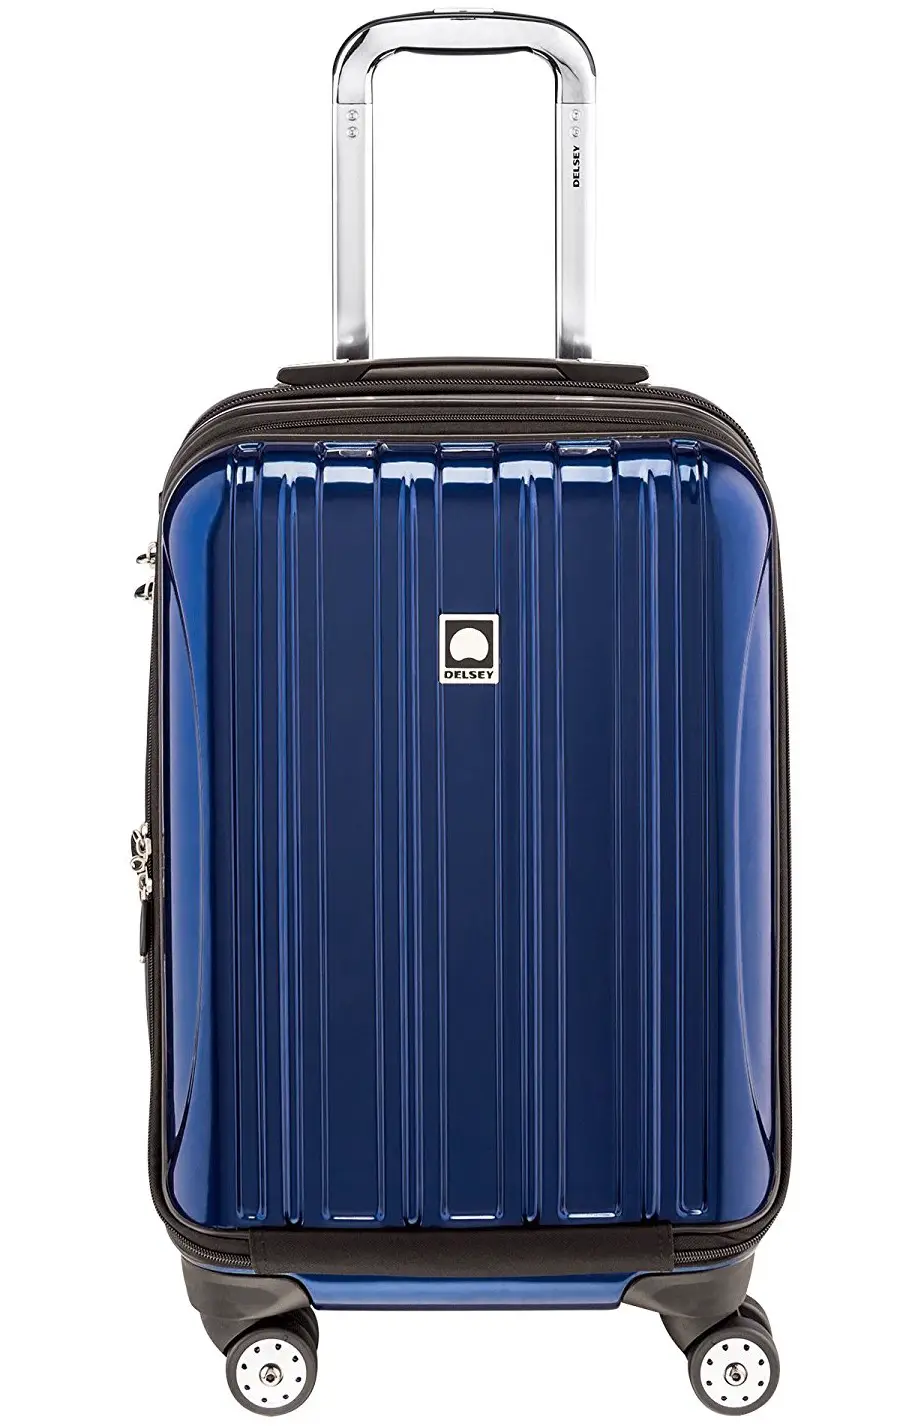 Delsey carry-on luggage